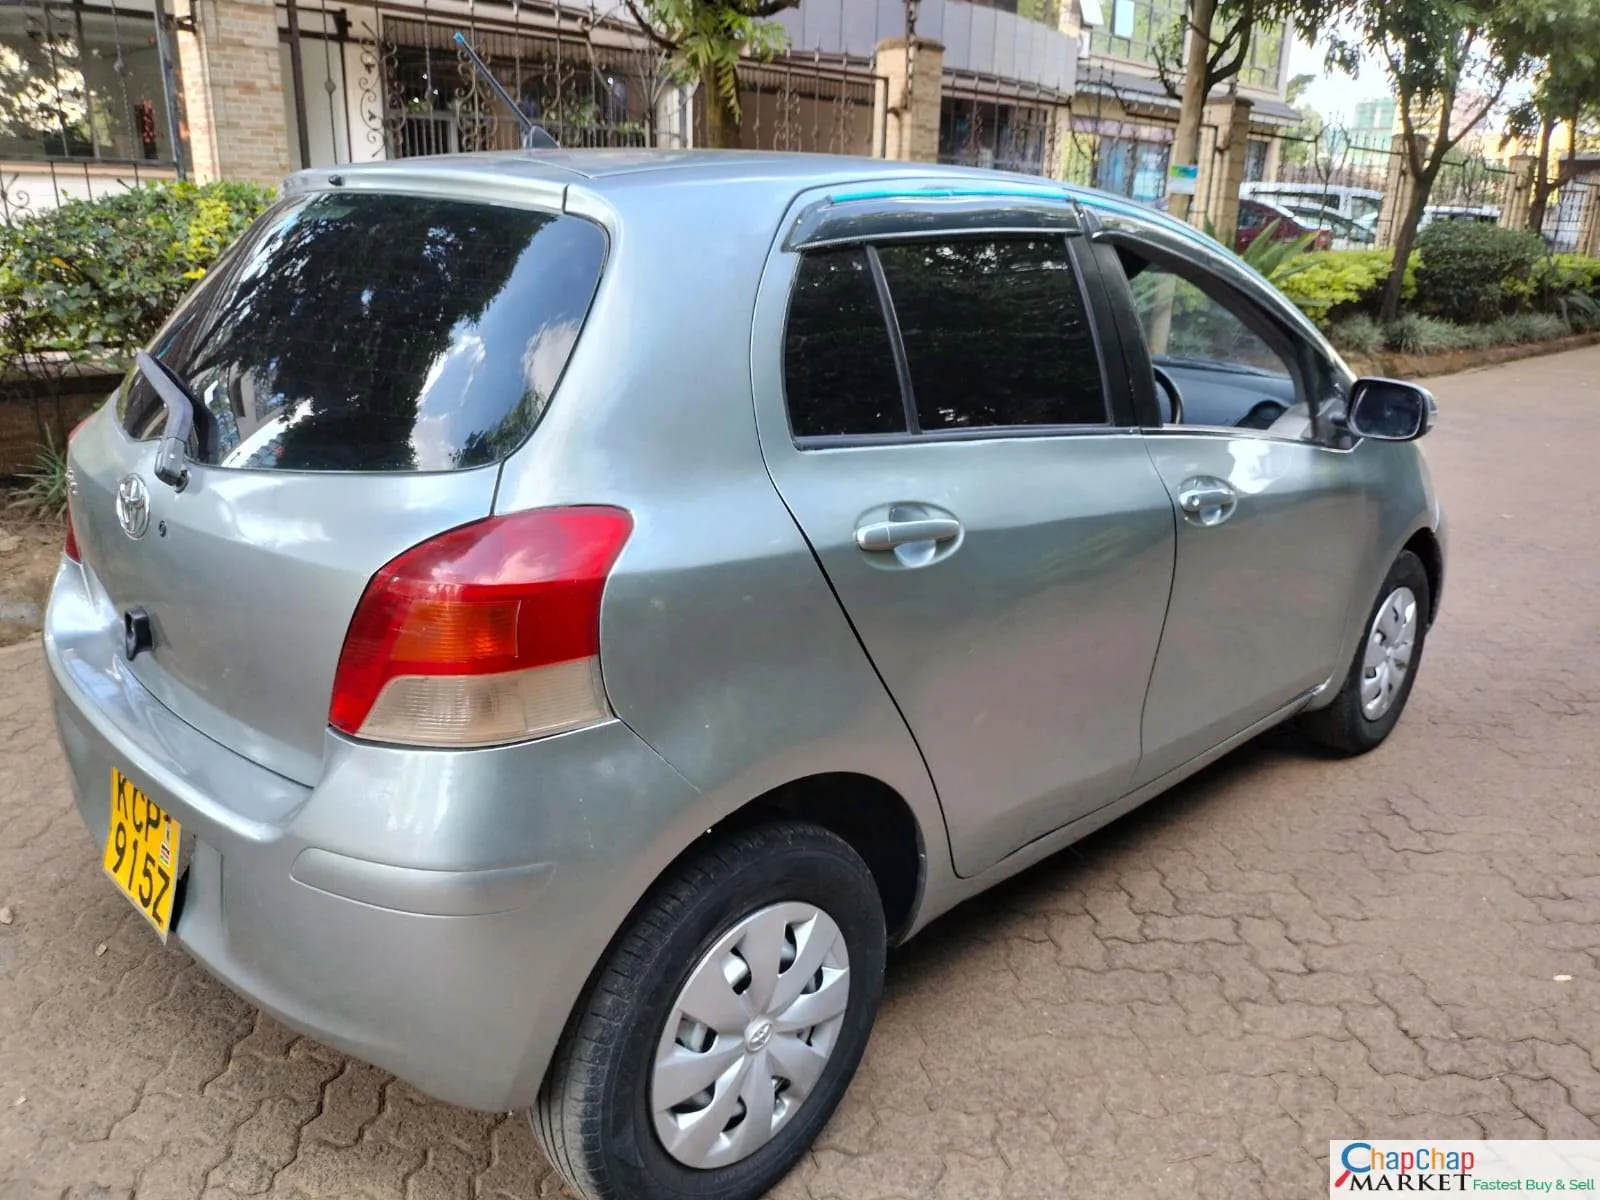 Toyota Vitz 1300cc 🔥 🔥 🔥 You Pay 30% Deposit Trade in OK EXCLUSIVE hire purchase installments